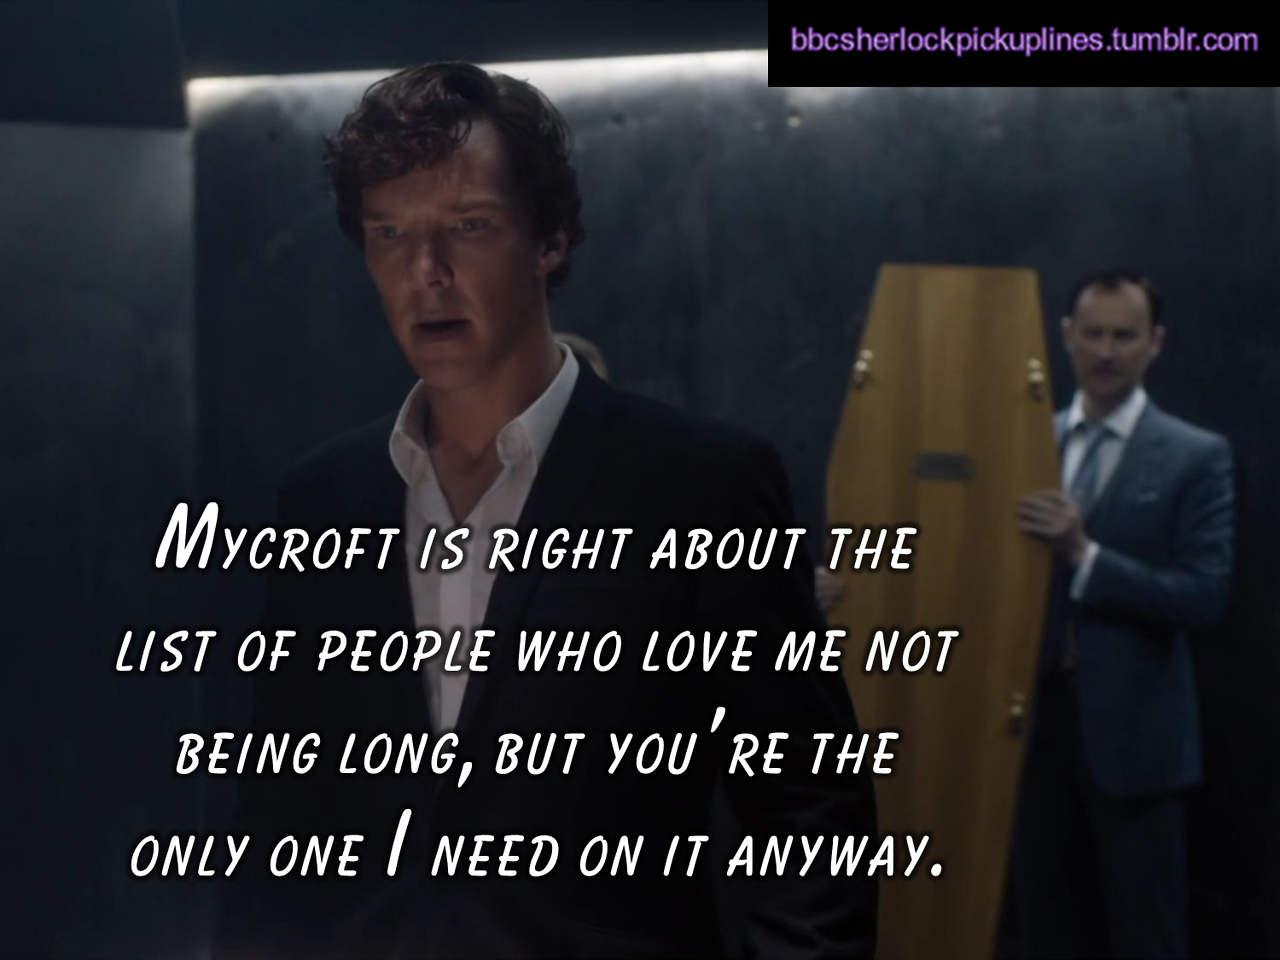 “Mycroft is right about the list of people who love me not being long, but you’re